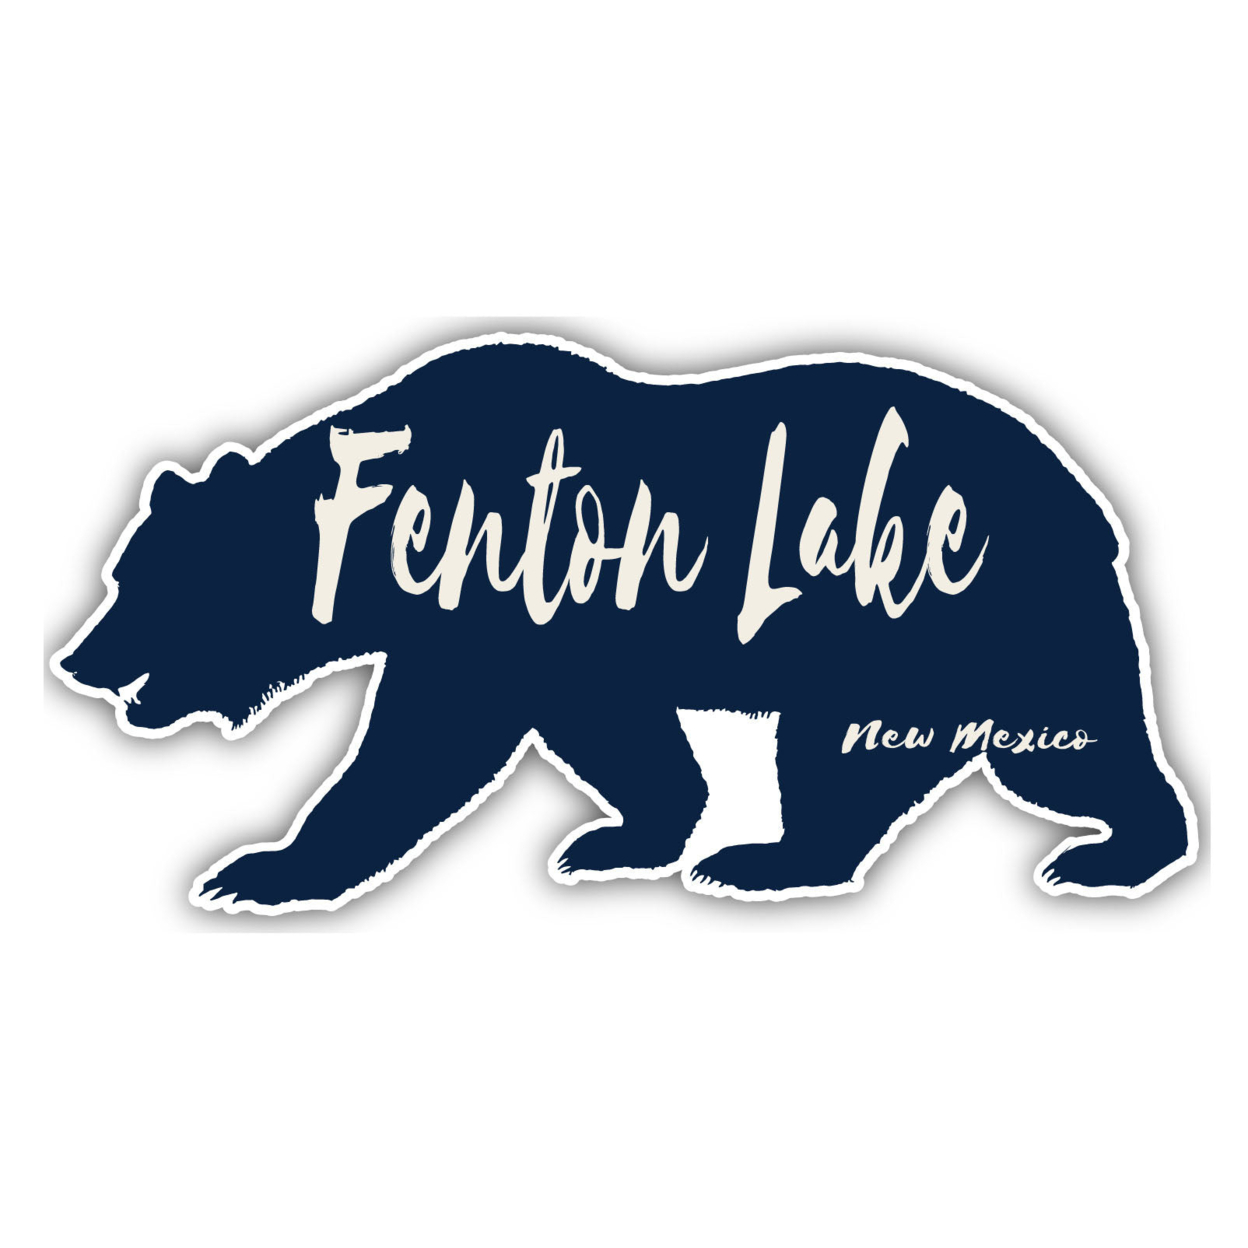 Fenton Lake New Mexico Souvenir Decorative Stickers (Choose Theme And Size) - 4-Pack, 6-Inch, Bear